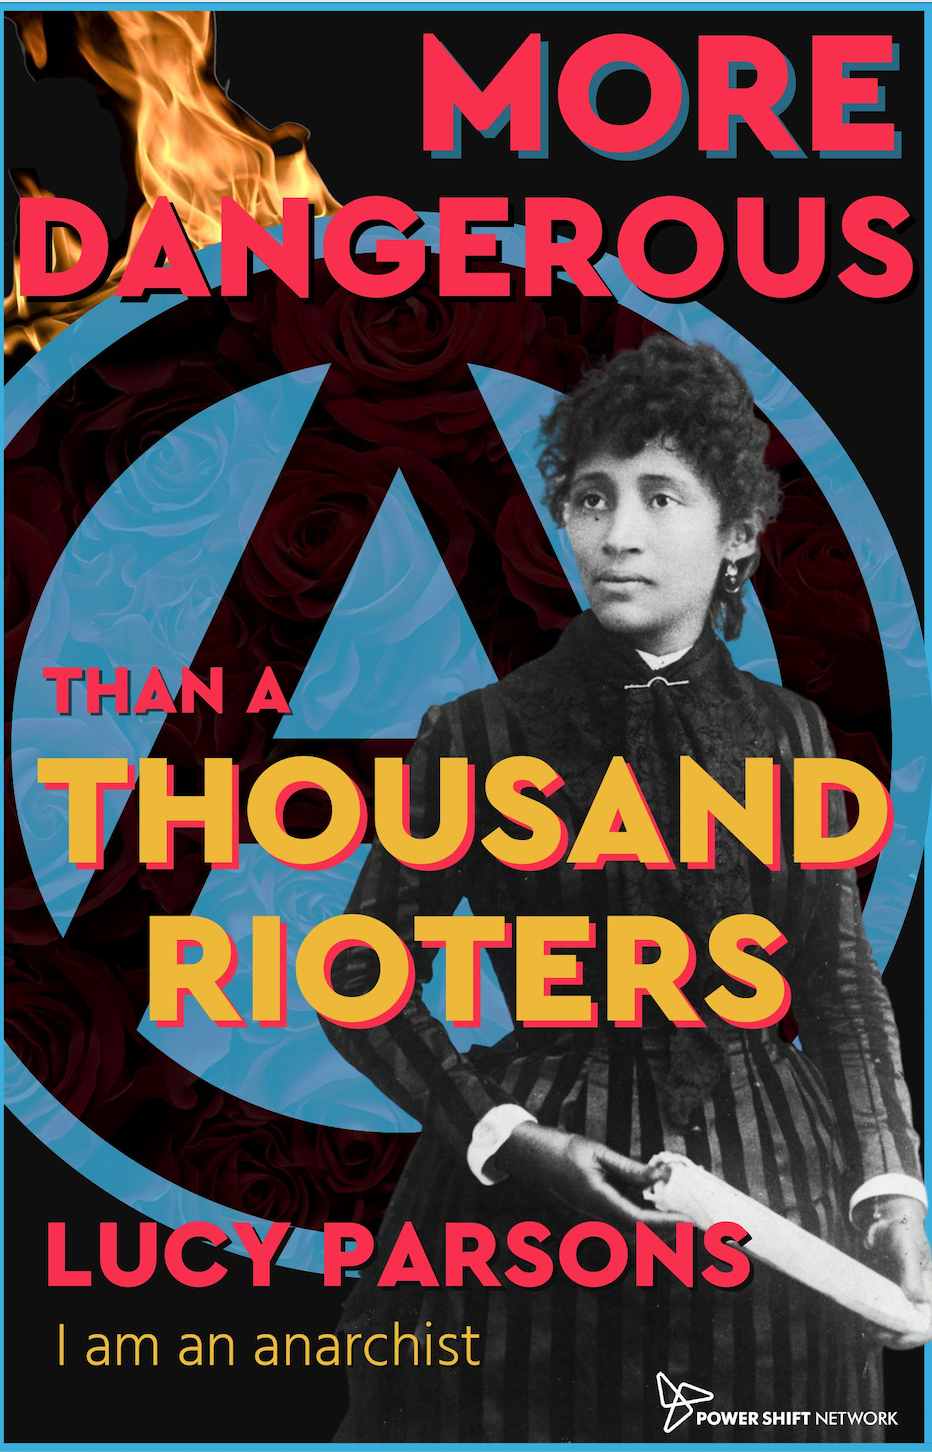 A blue and black A sign site in the background of this graphic. There is fire popping out on the top left corner of it. A black and white image of Lucy Parsons is in front of the A and the words "<ore Dangerous Than A Thousand Rioters Lucy Parsons I am an anarchist" are written across the graphic